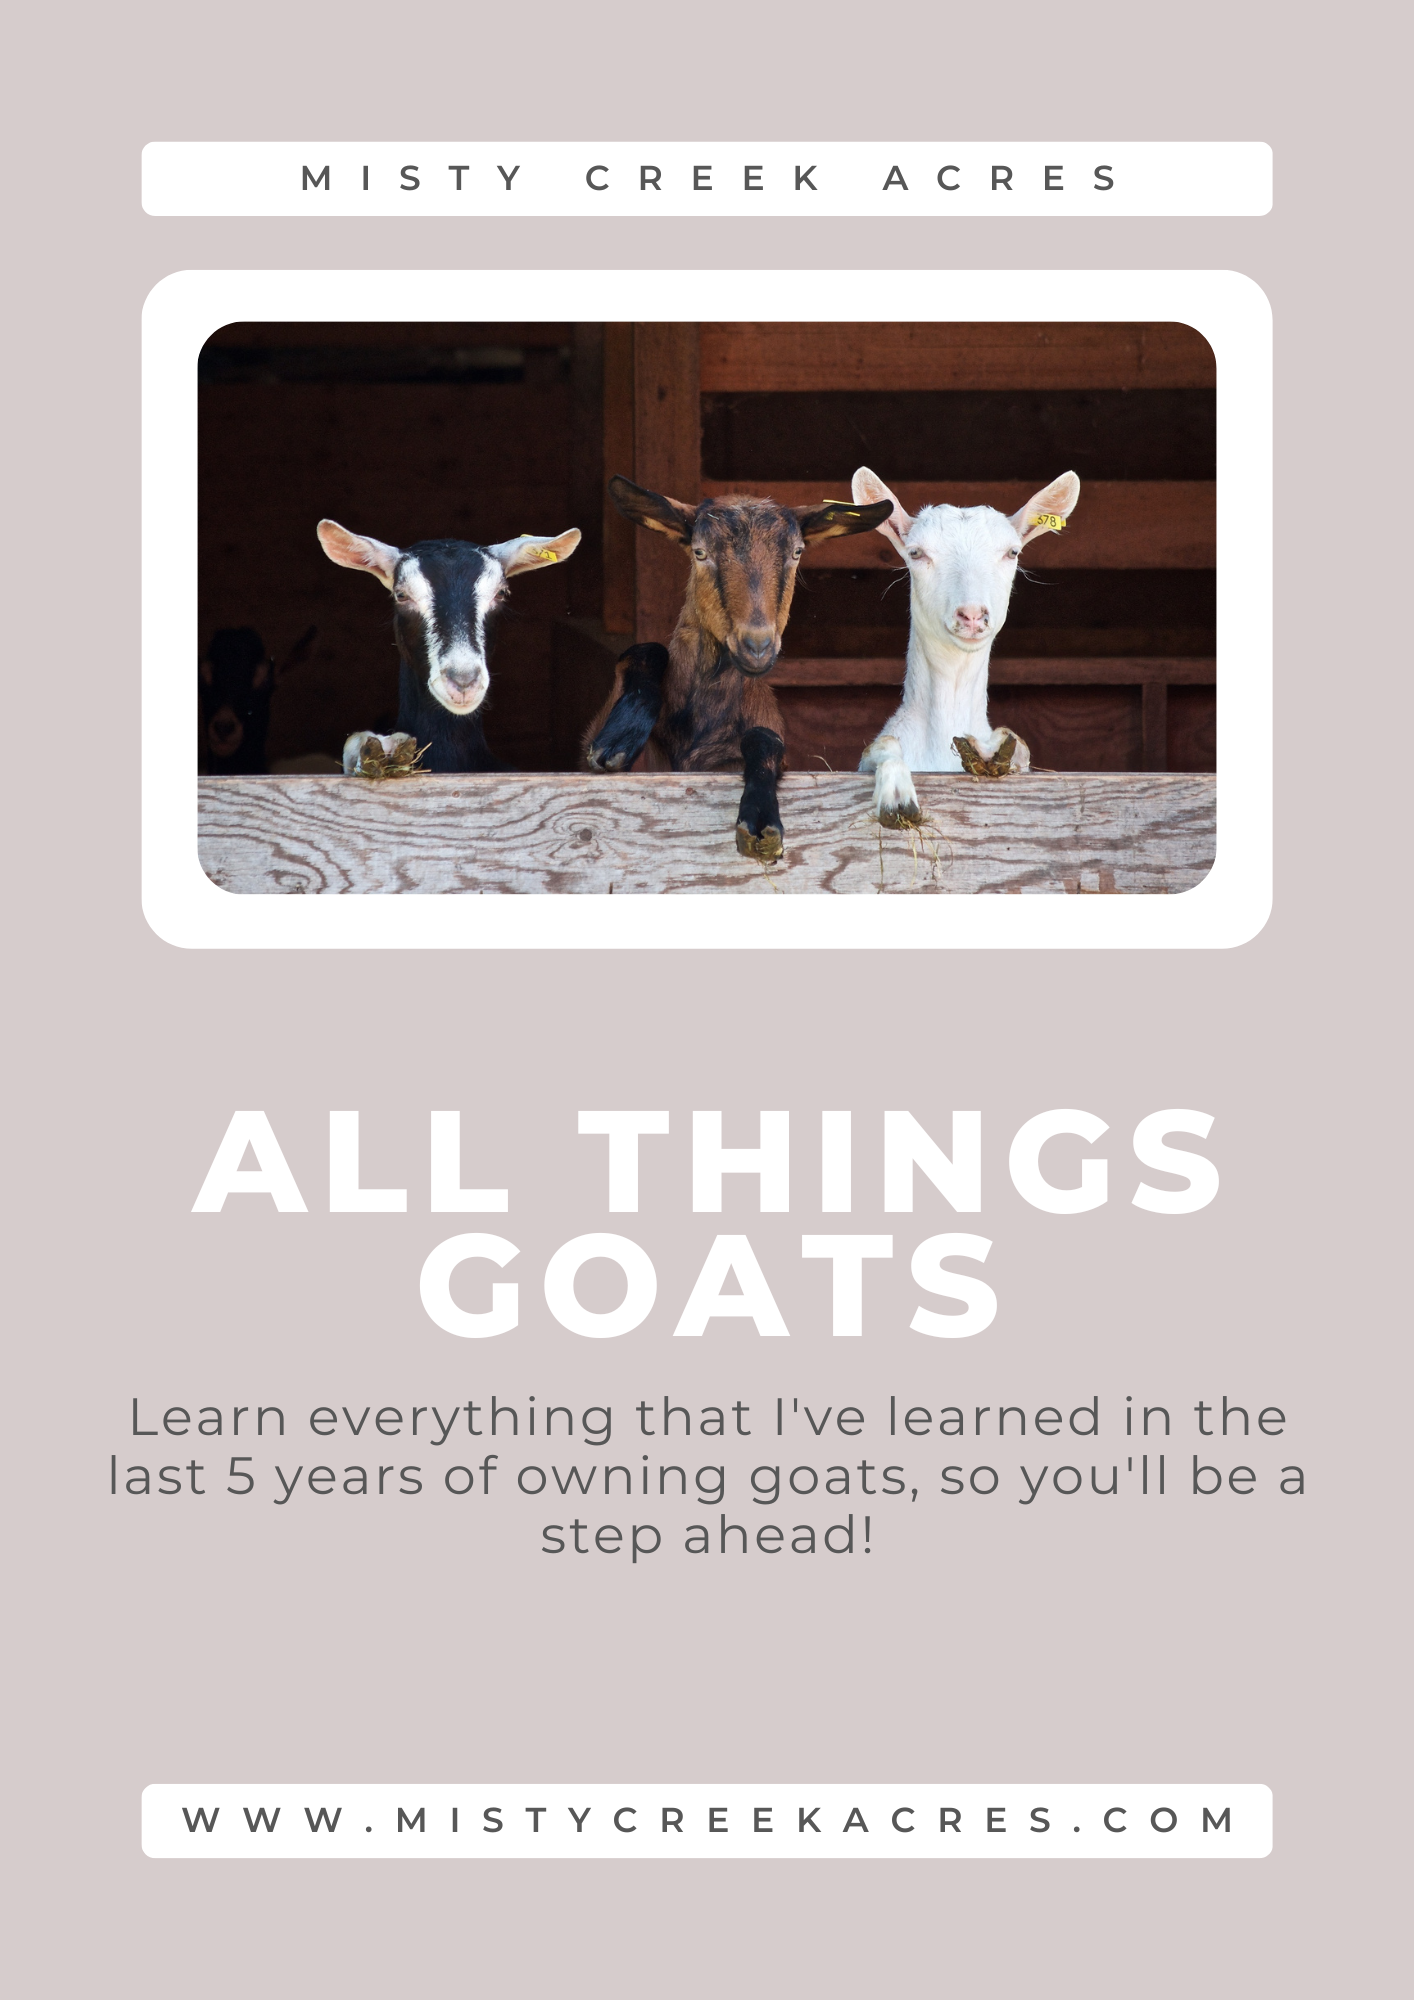 All About Goats, Learning to Raise Goats, How to Own Goats, Homesteading Guides